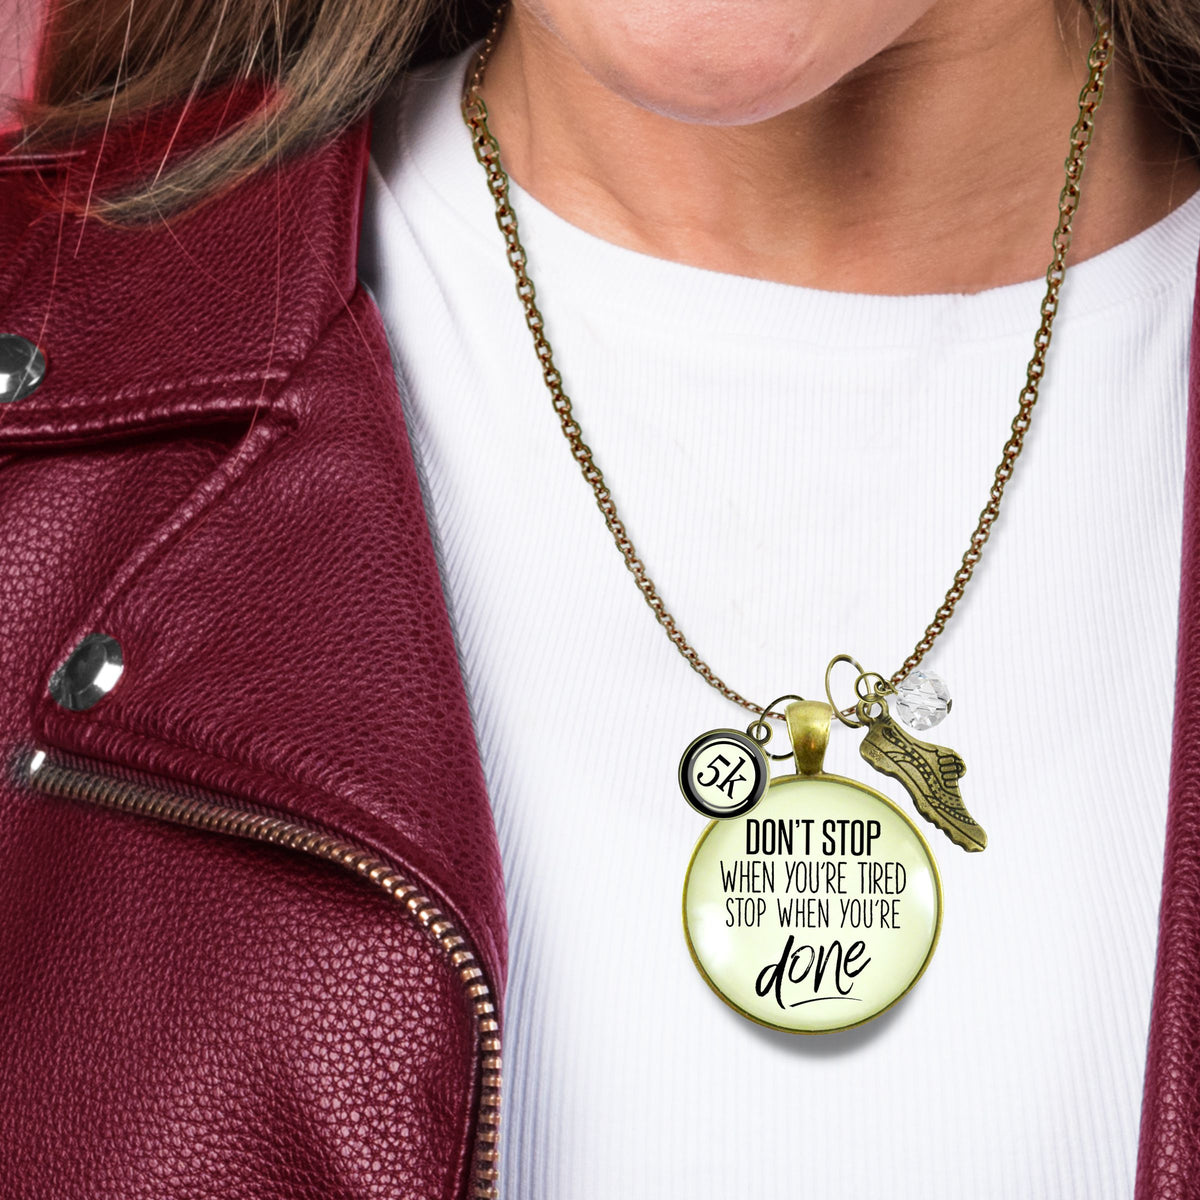 10K Marathon Necklace Don't Stop When You're Tired Motivational Run Sport Charm  Necklace - Gutsy Goodness Handmade Jewelry